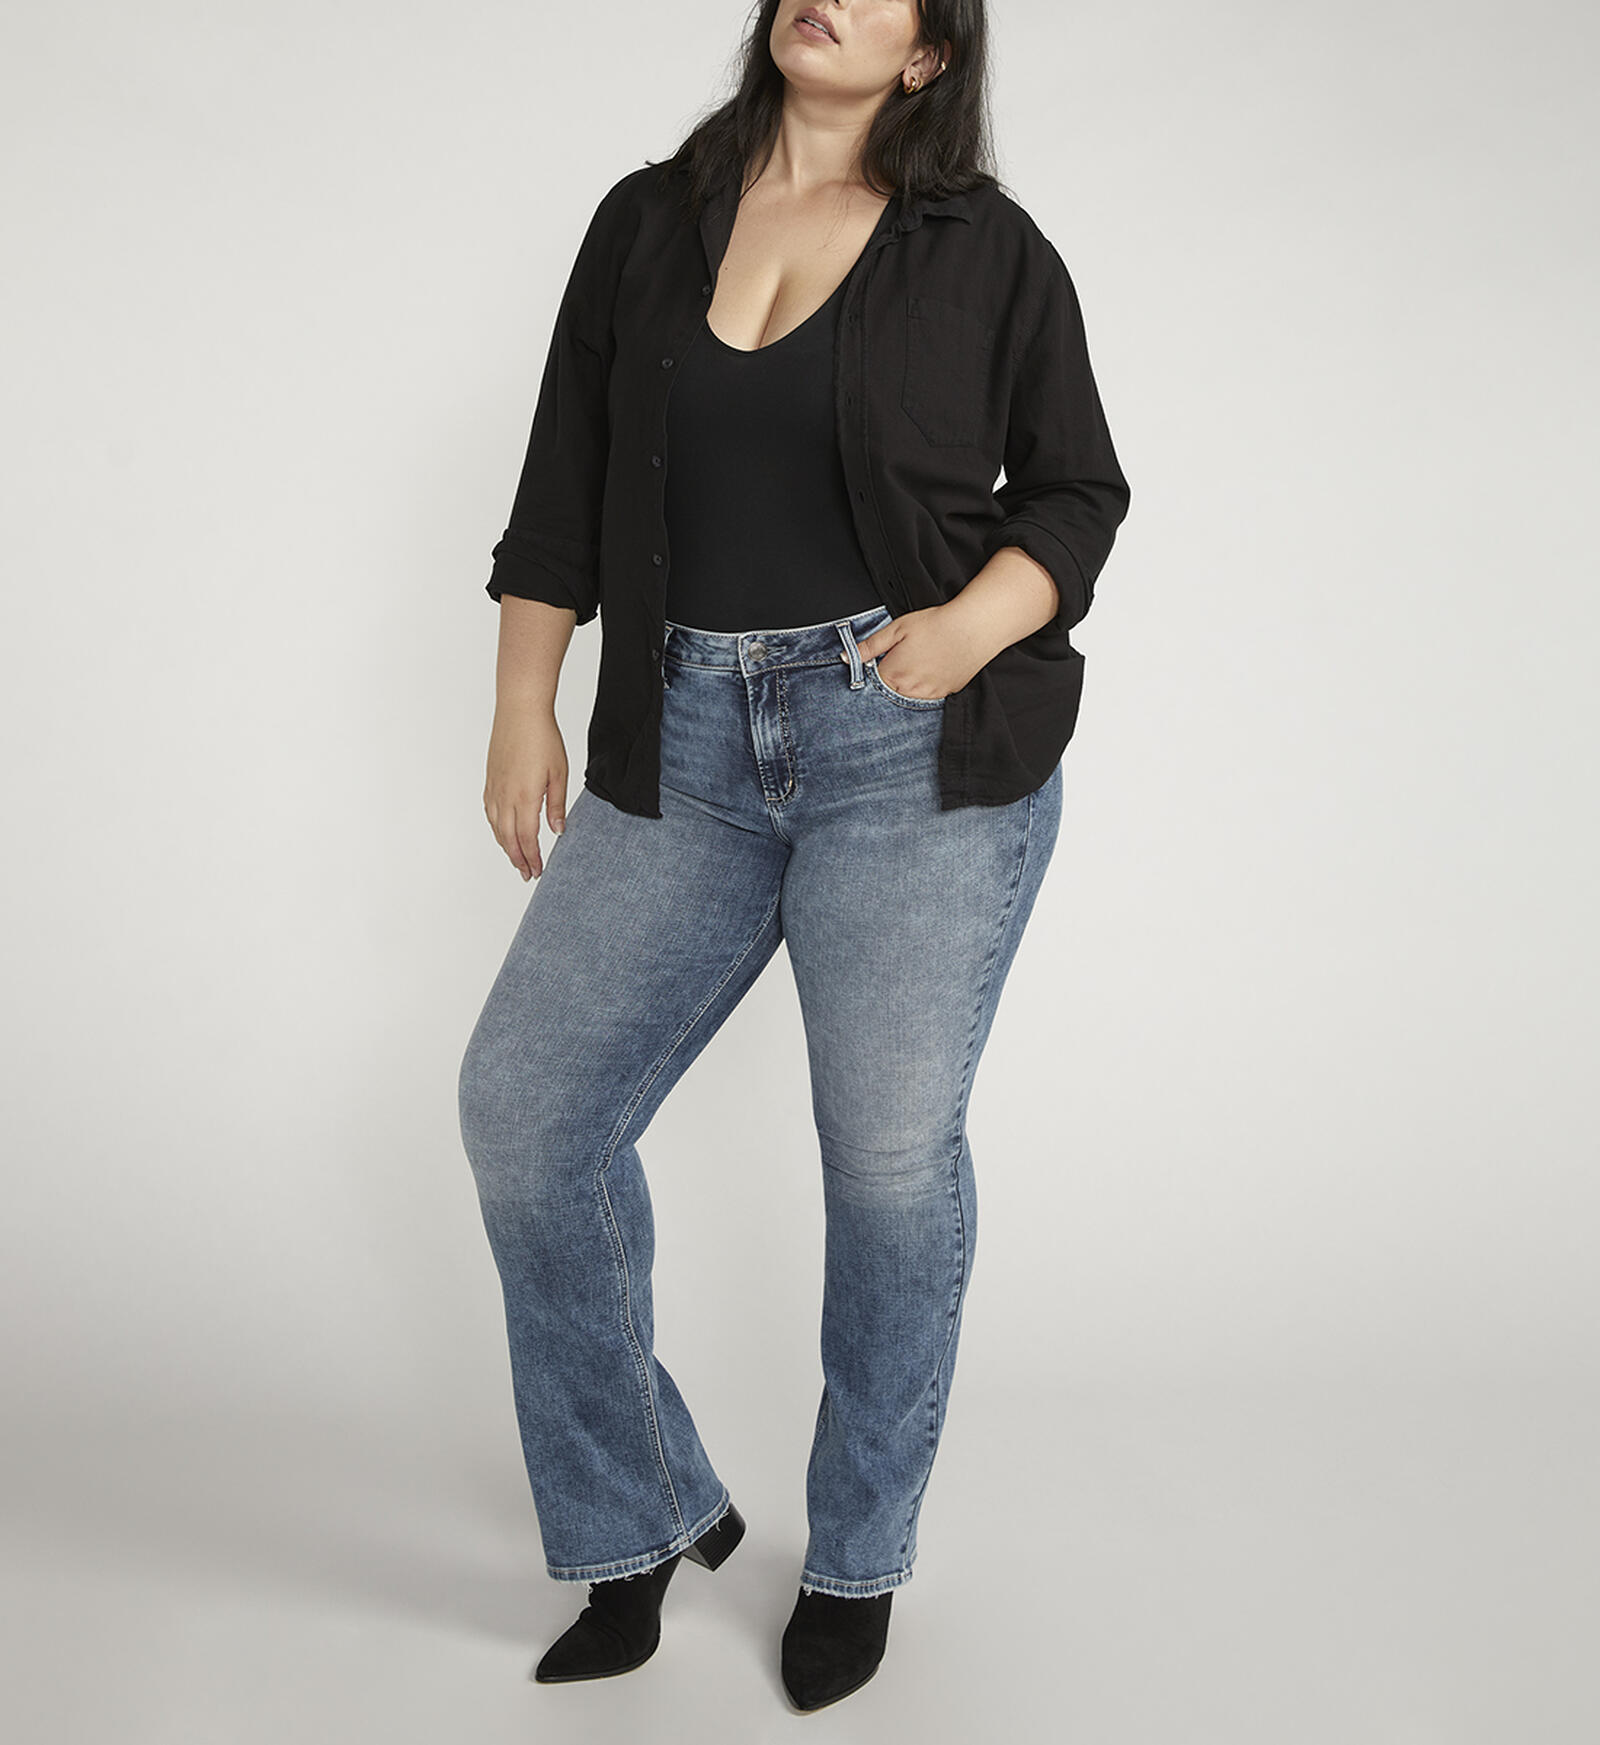 Buy Eloise Mid Rise Bootcut Jeans Plus Size for USD 52.00